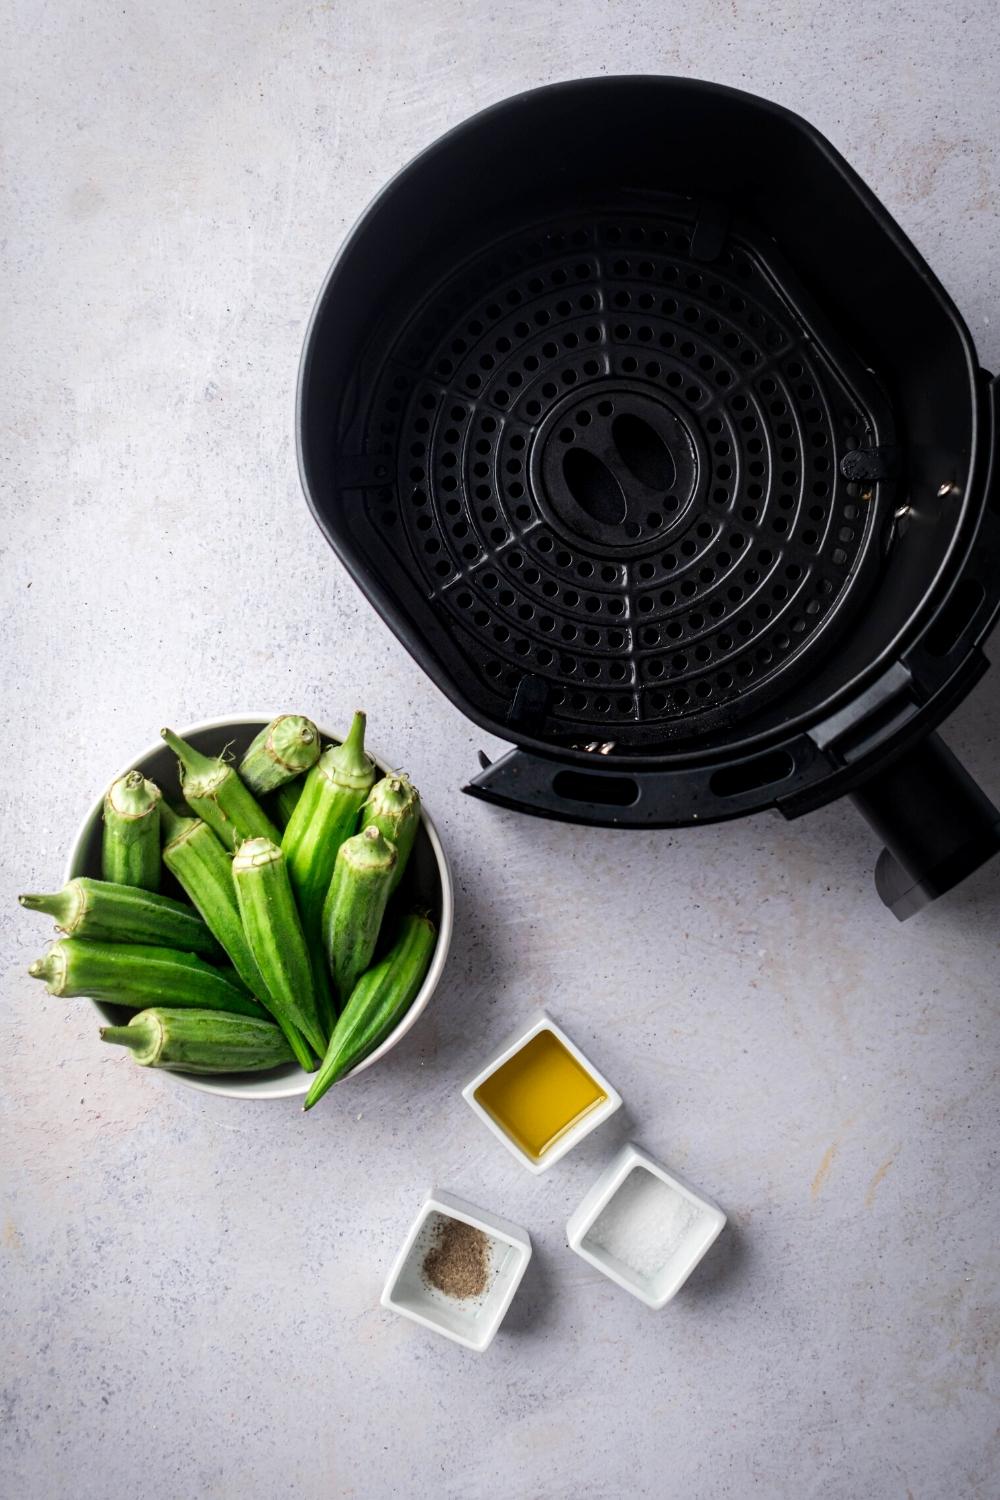 An air fryer, a bowl filled with okra, a small cup of olive oil, a small cup of salt, and a small cup of pepper all on a grey counter.